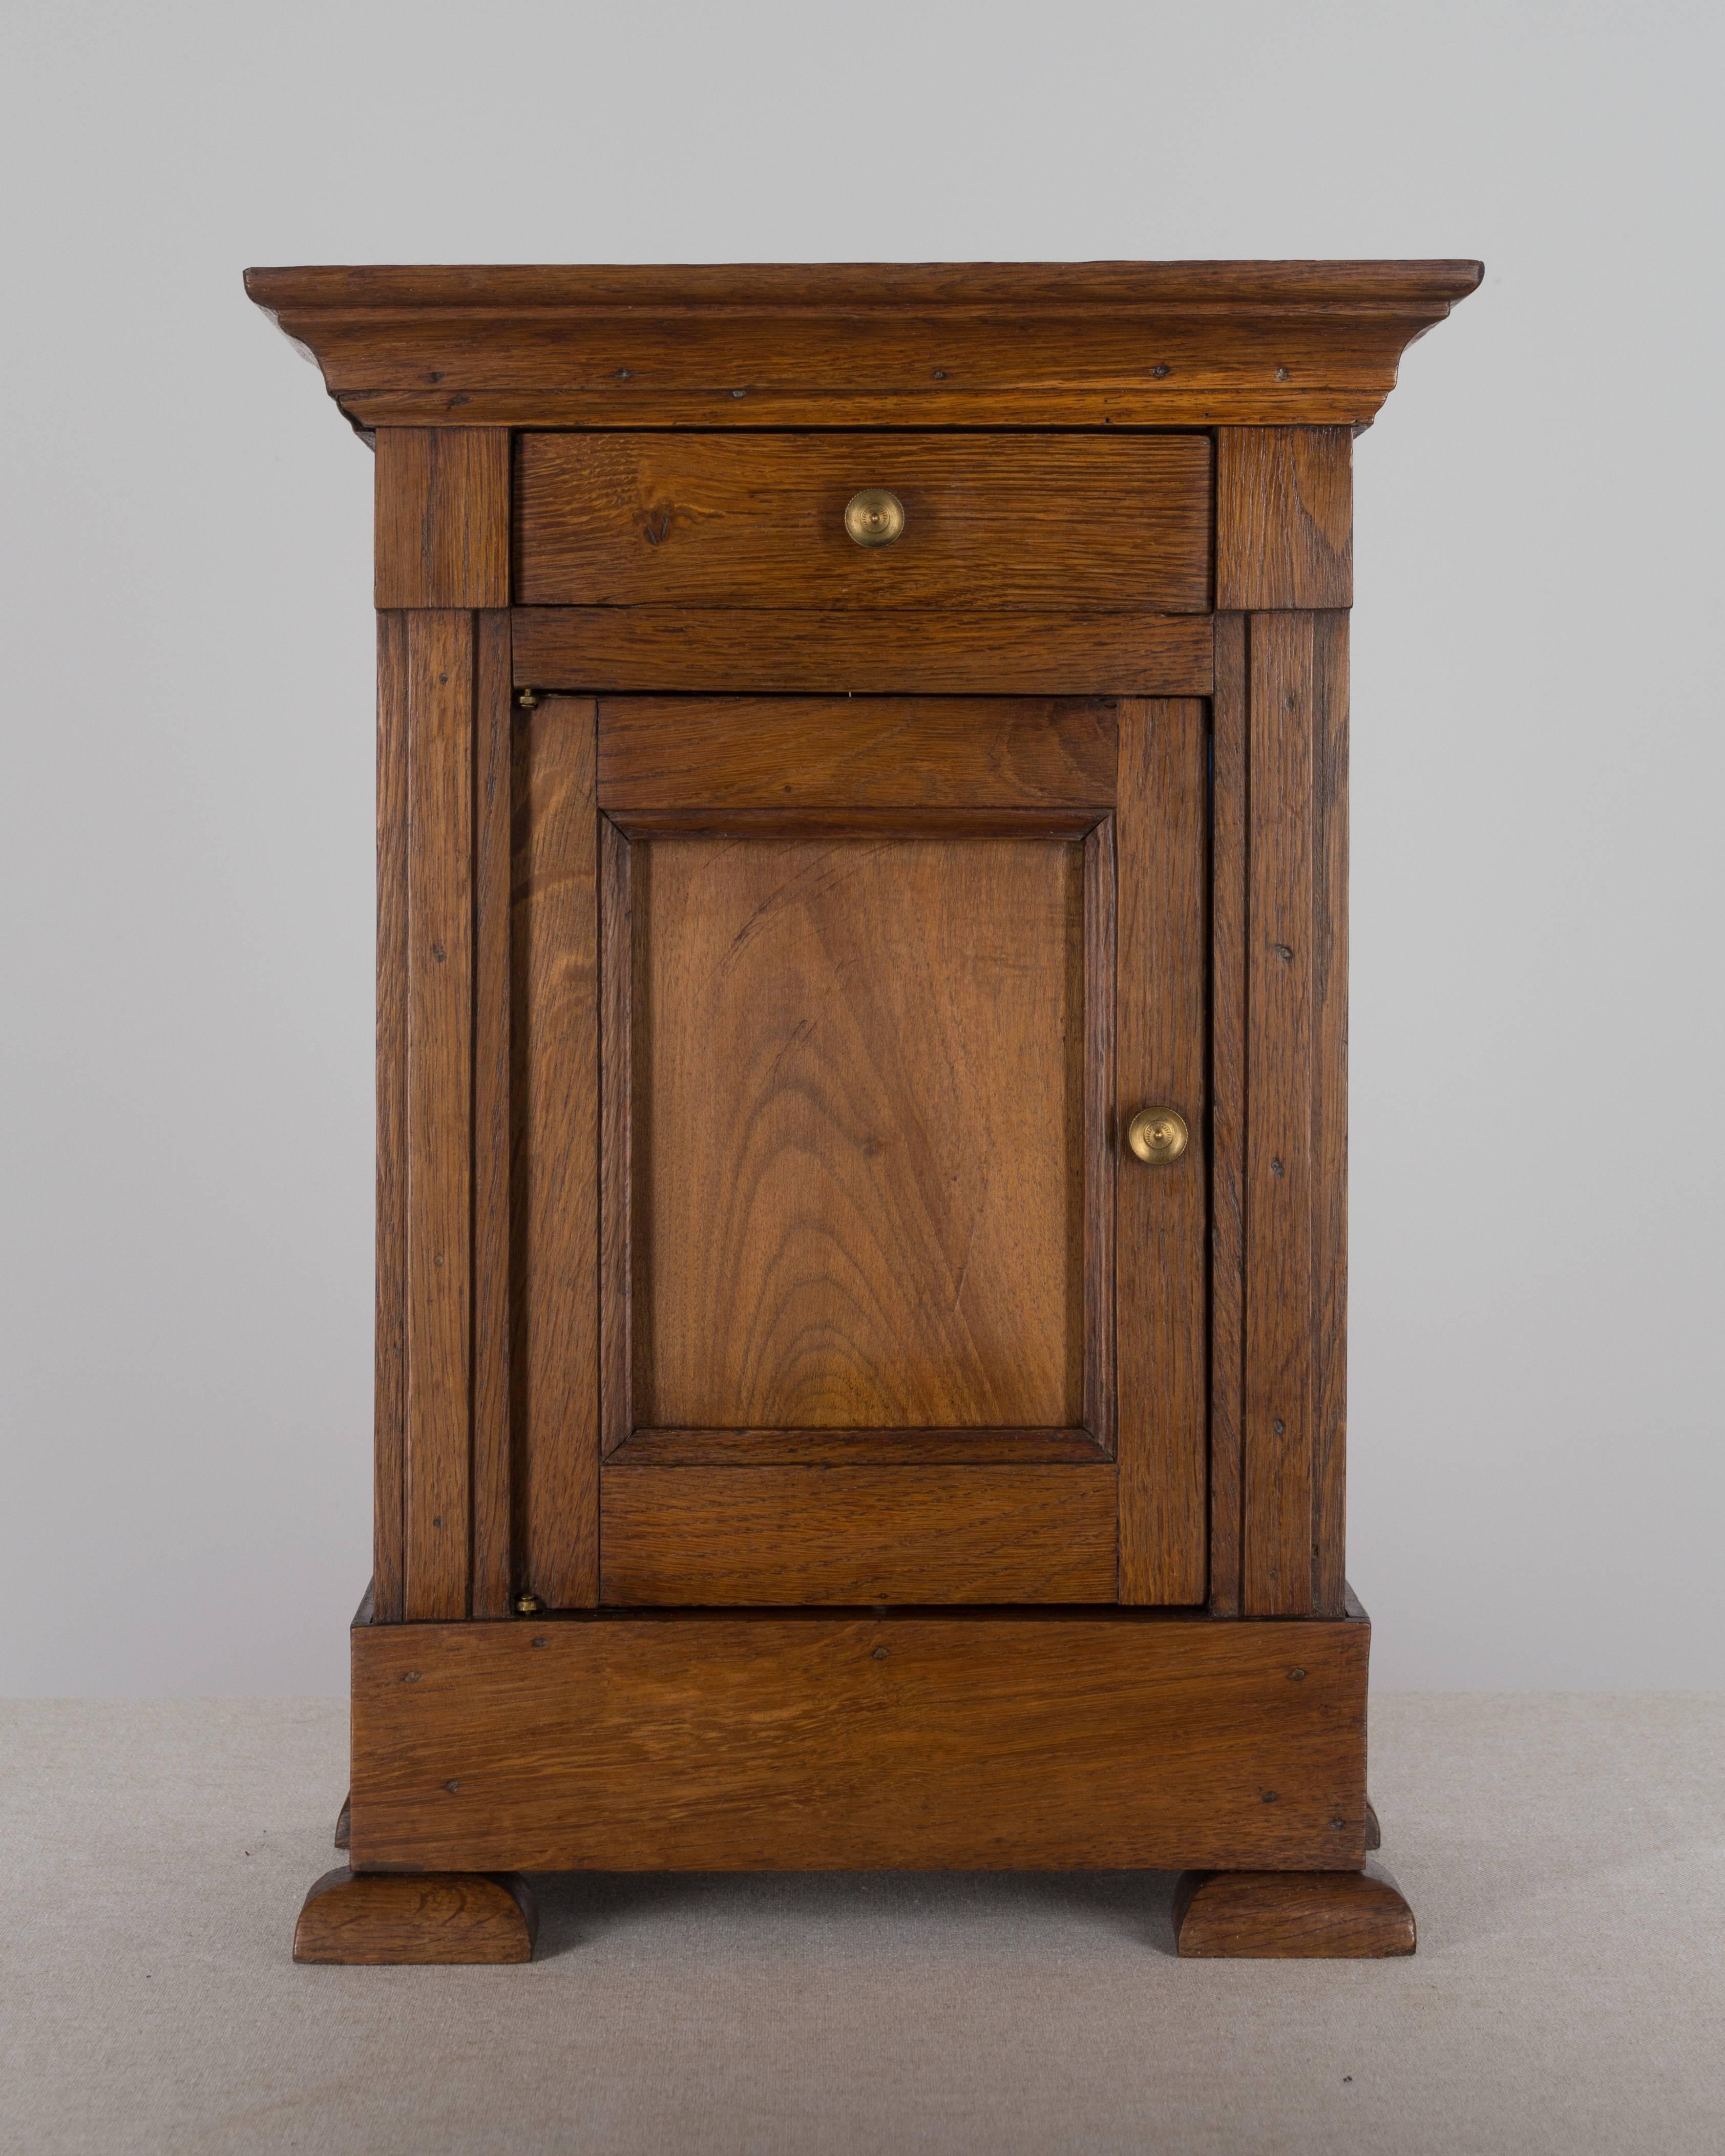 19th century French Louis Philippe miniature cabinet or side table, with a single dovetailed drawer and cabinet door. Made of oak with waxed patina. 17.5" H x 12.5" W x 6.5".
More photos available upon request. We have a large